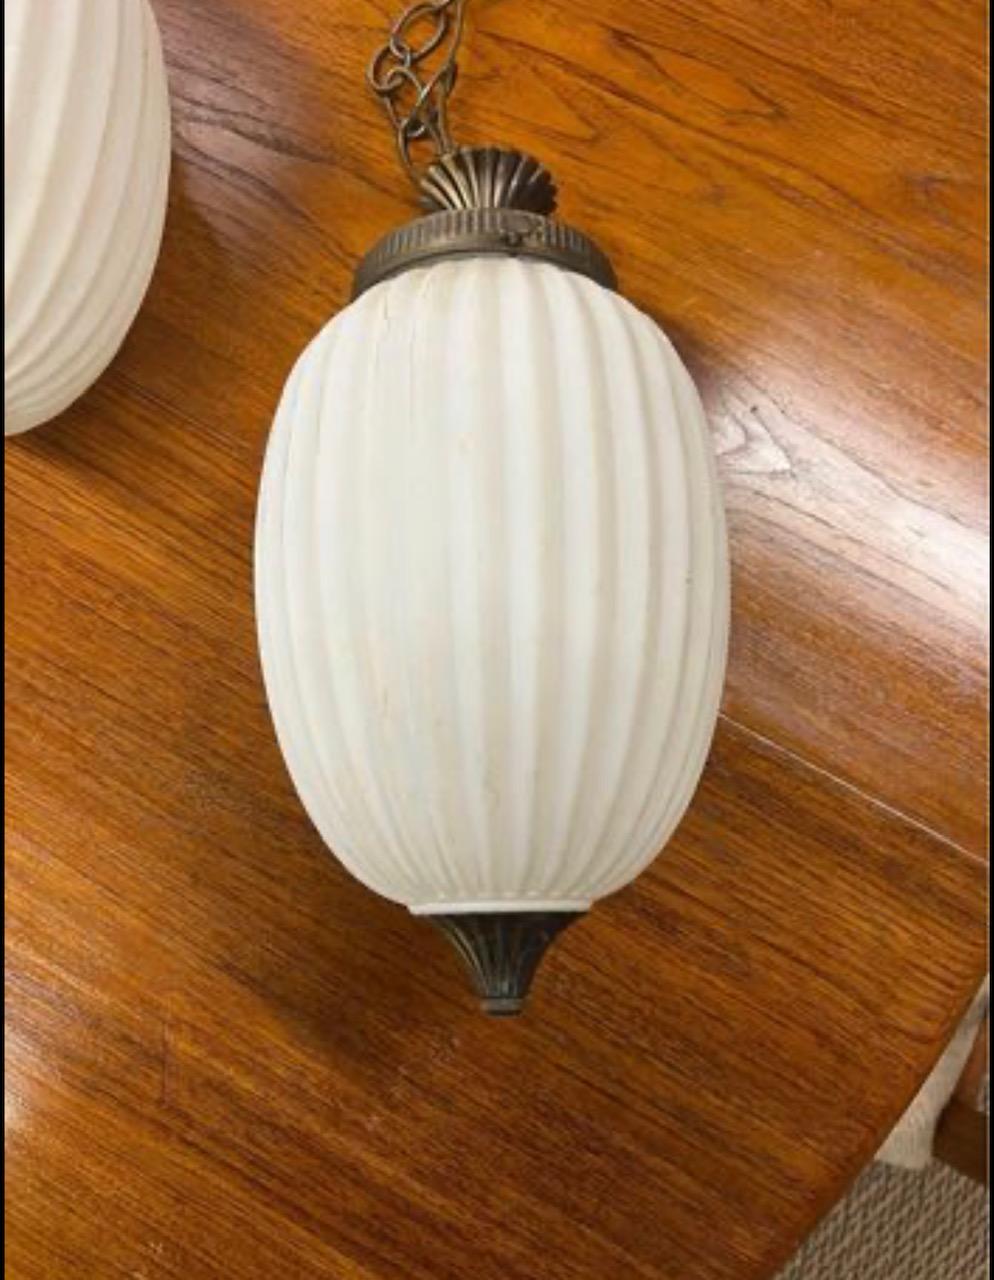 Pair of mid century modern milk glass hanging swag lights. Untested. Removed from original owner's home last year.
The lamps measure 7